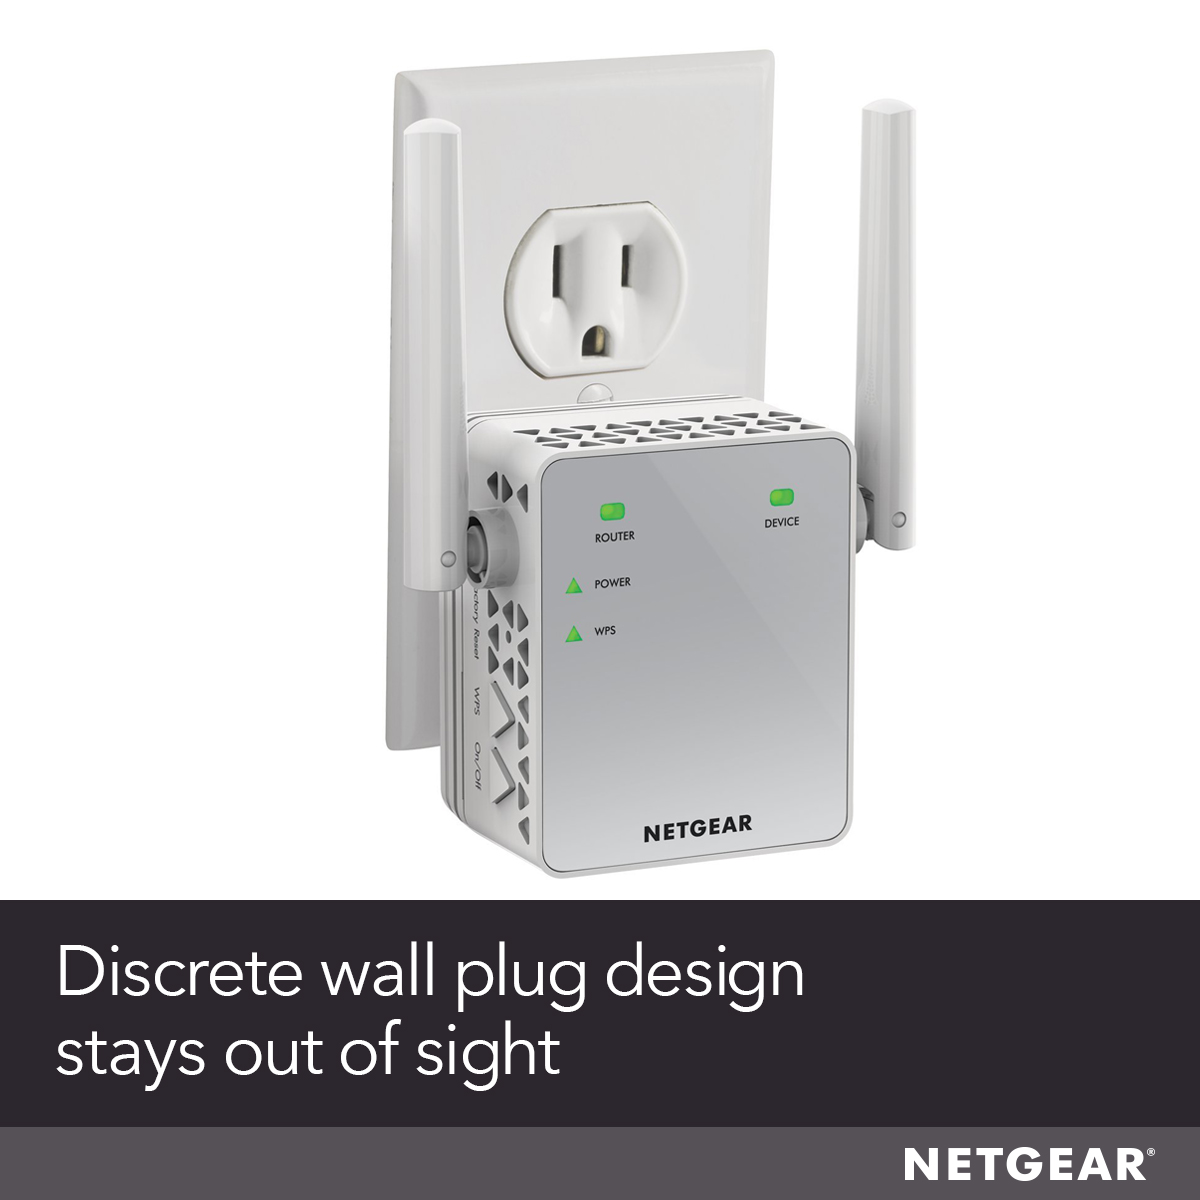 NETGEAR - AC750 WiFi Range Extender and Signal Booster, Wall-Plug, 750Mbps (EX3700) - image 3 of 7